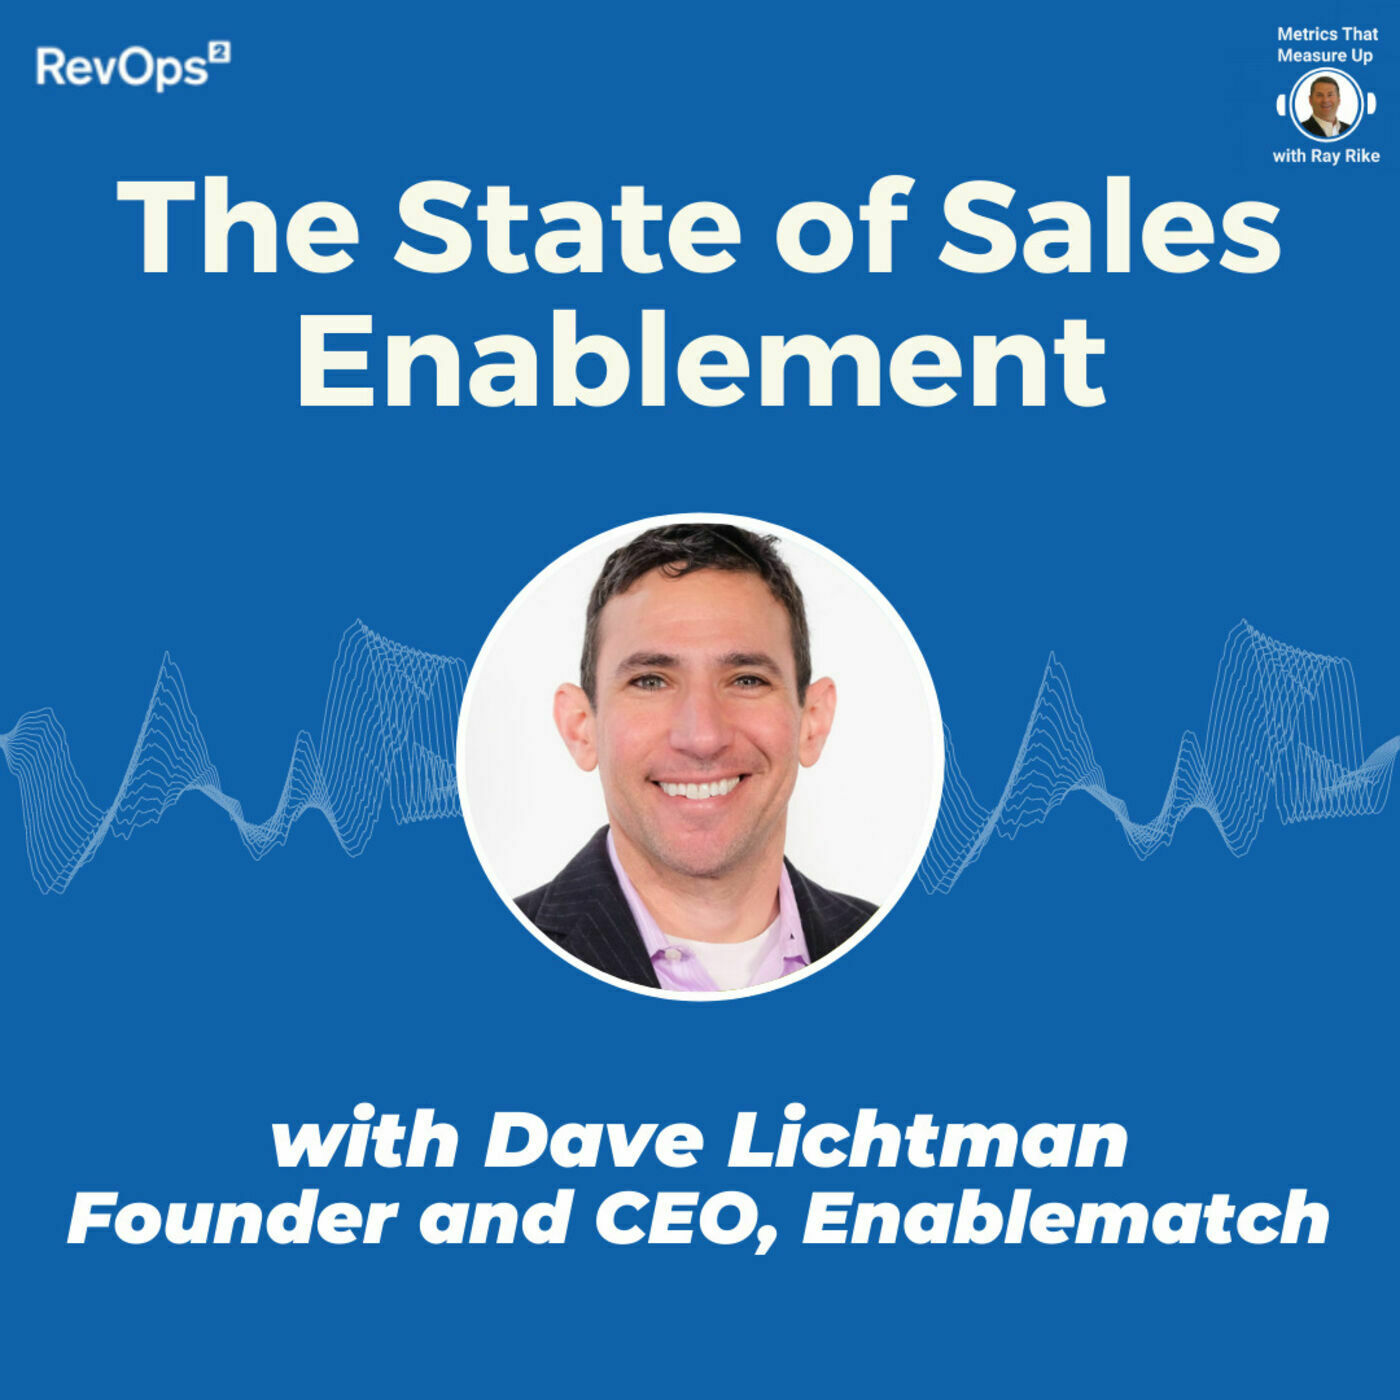 The State of Sales Enablement - with Dave Lichtman, Founder and CEO Enablematch